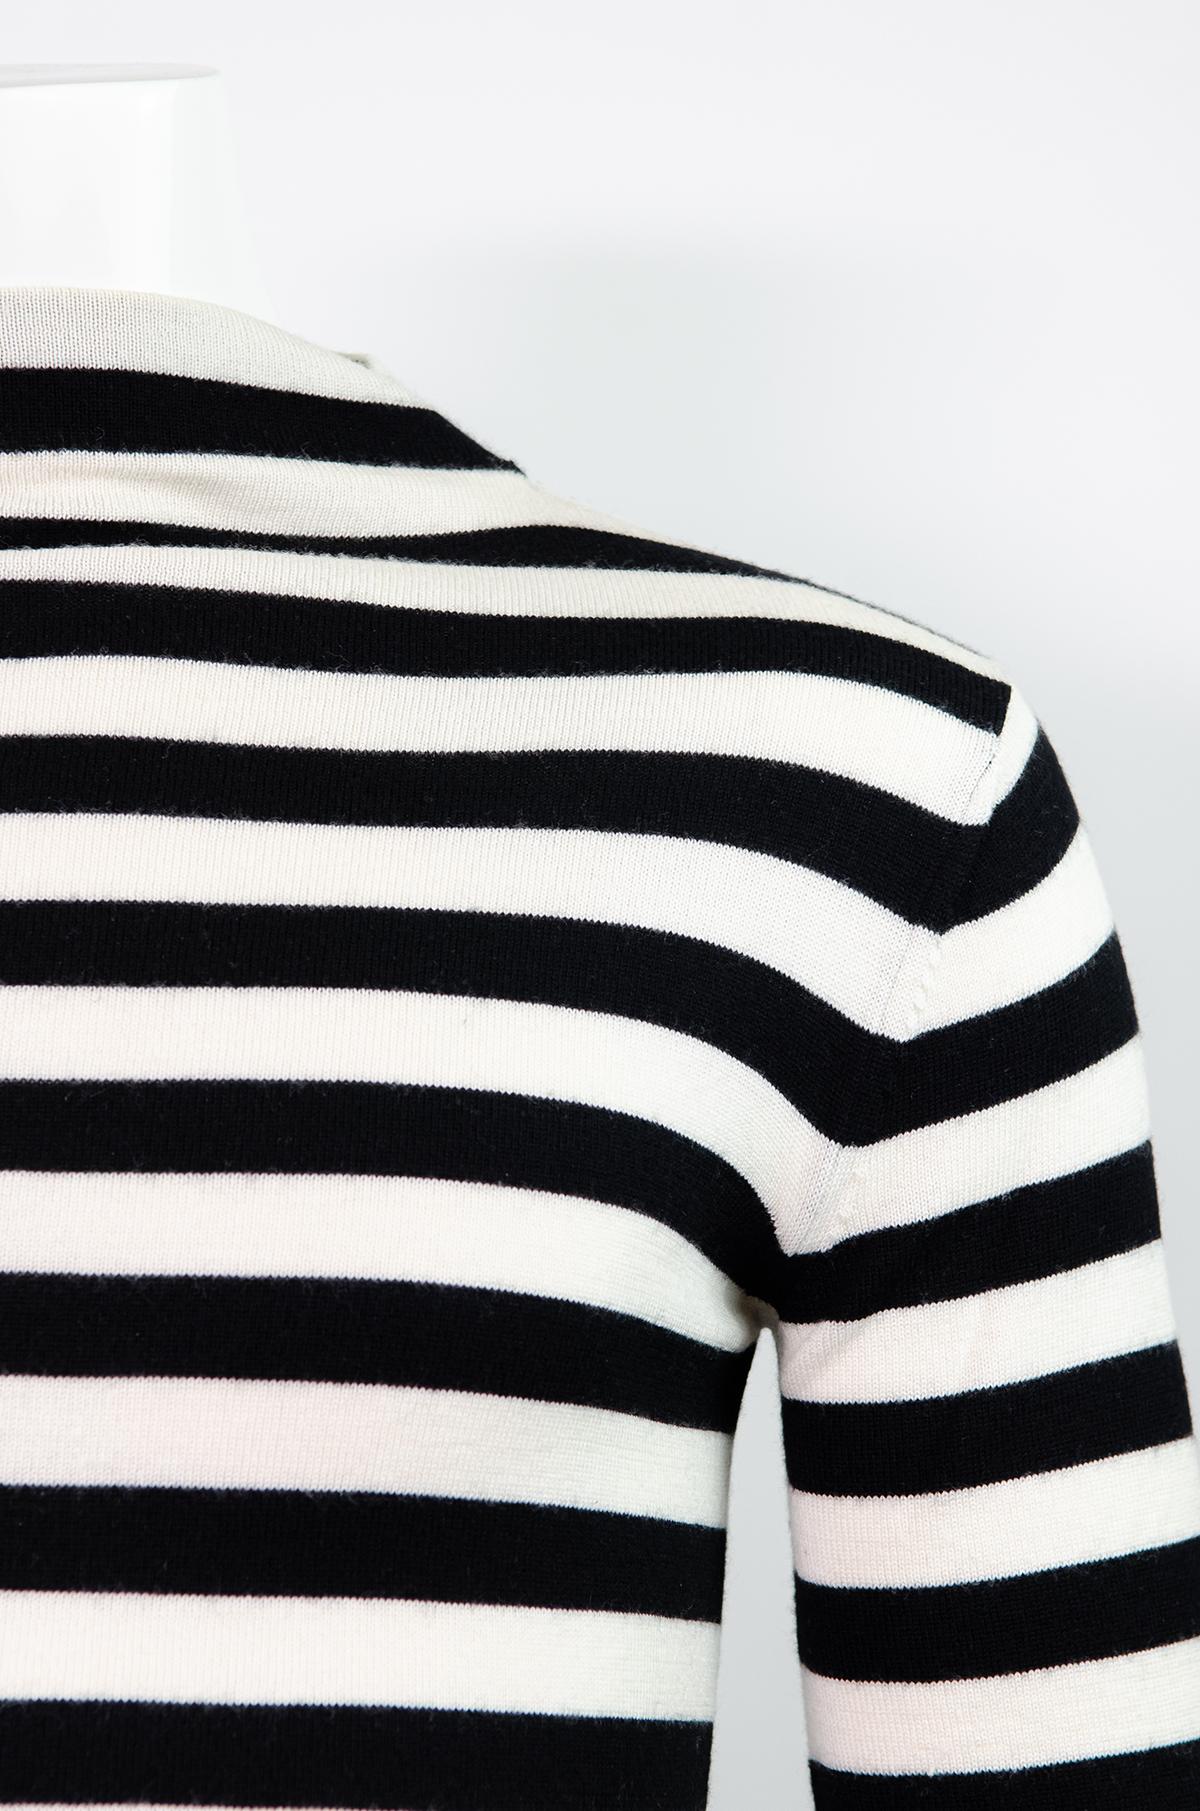 SAINT LAURENT By HEDI SLIMANE F/W 2015 Striped Sweater S For Sale 1